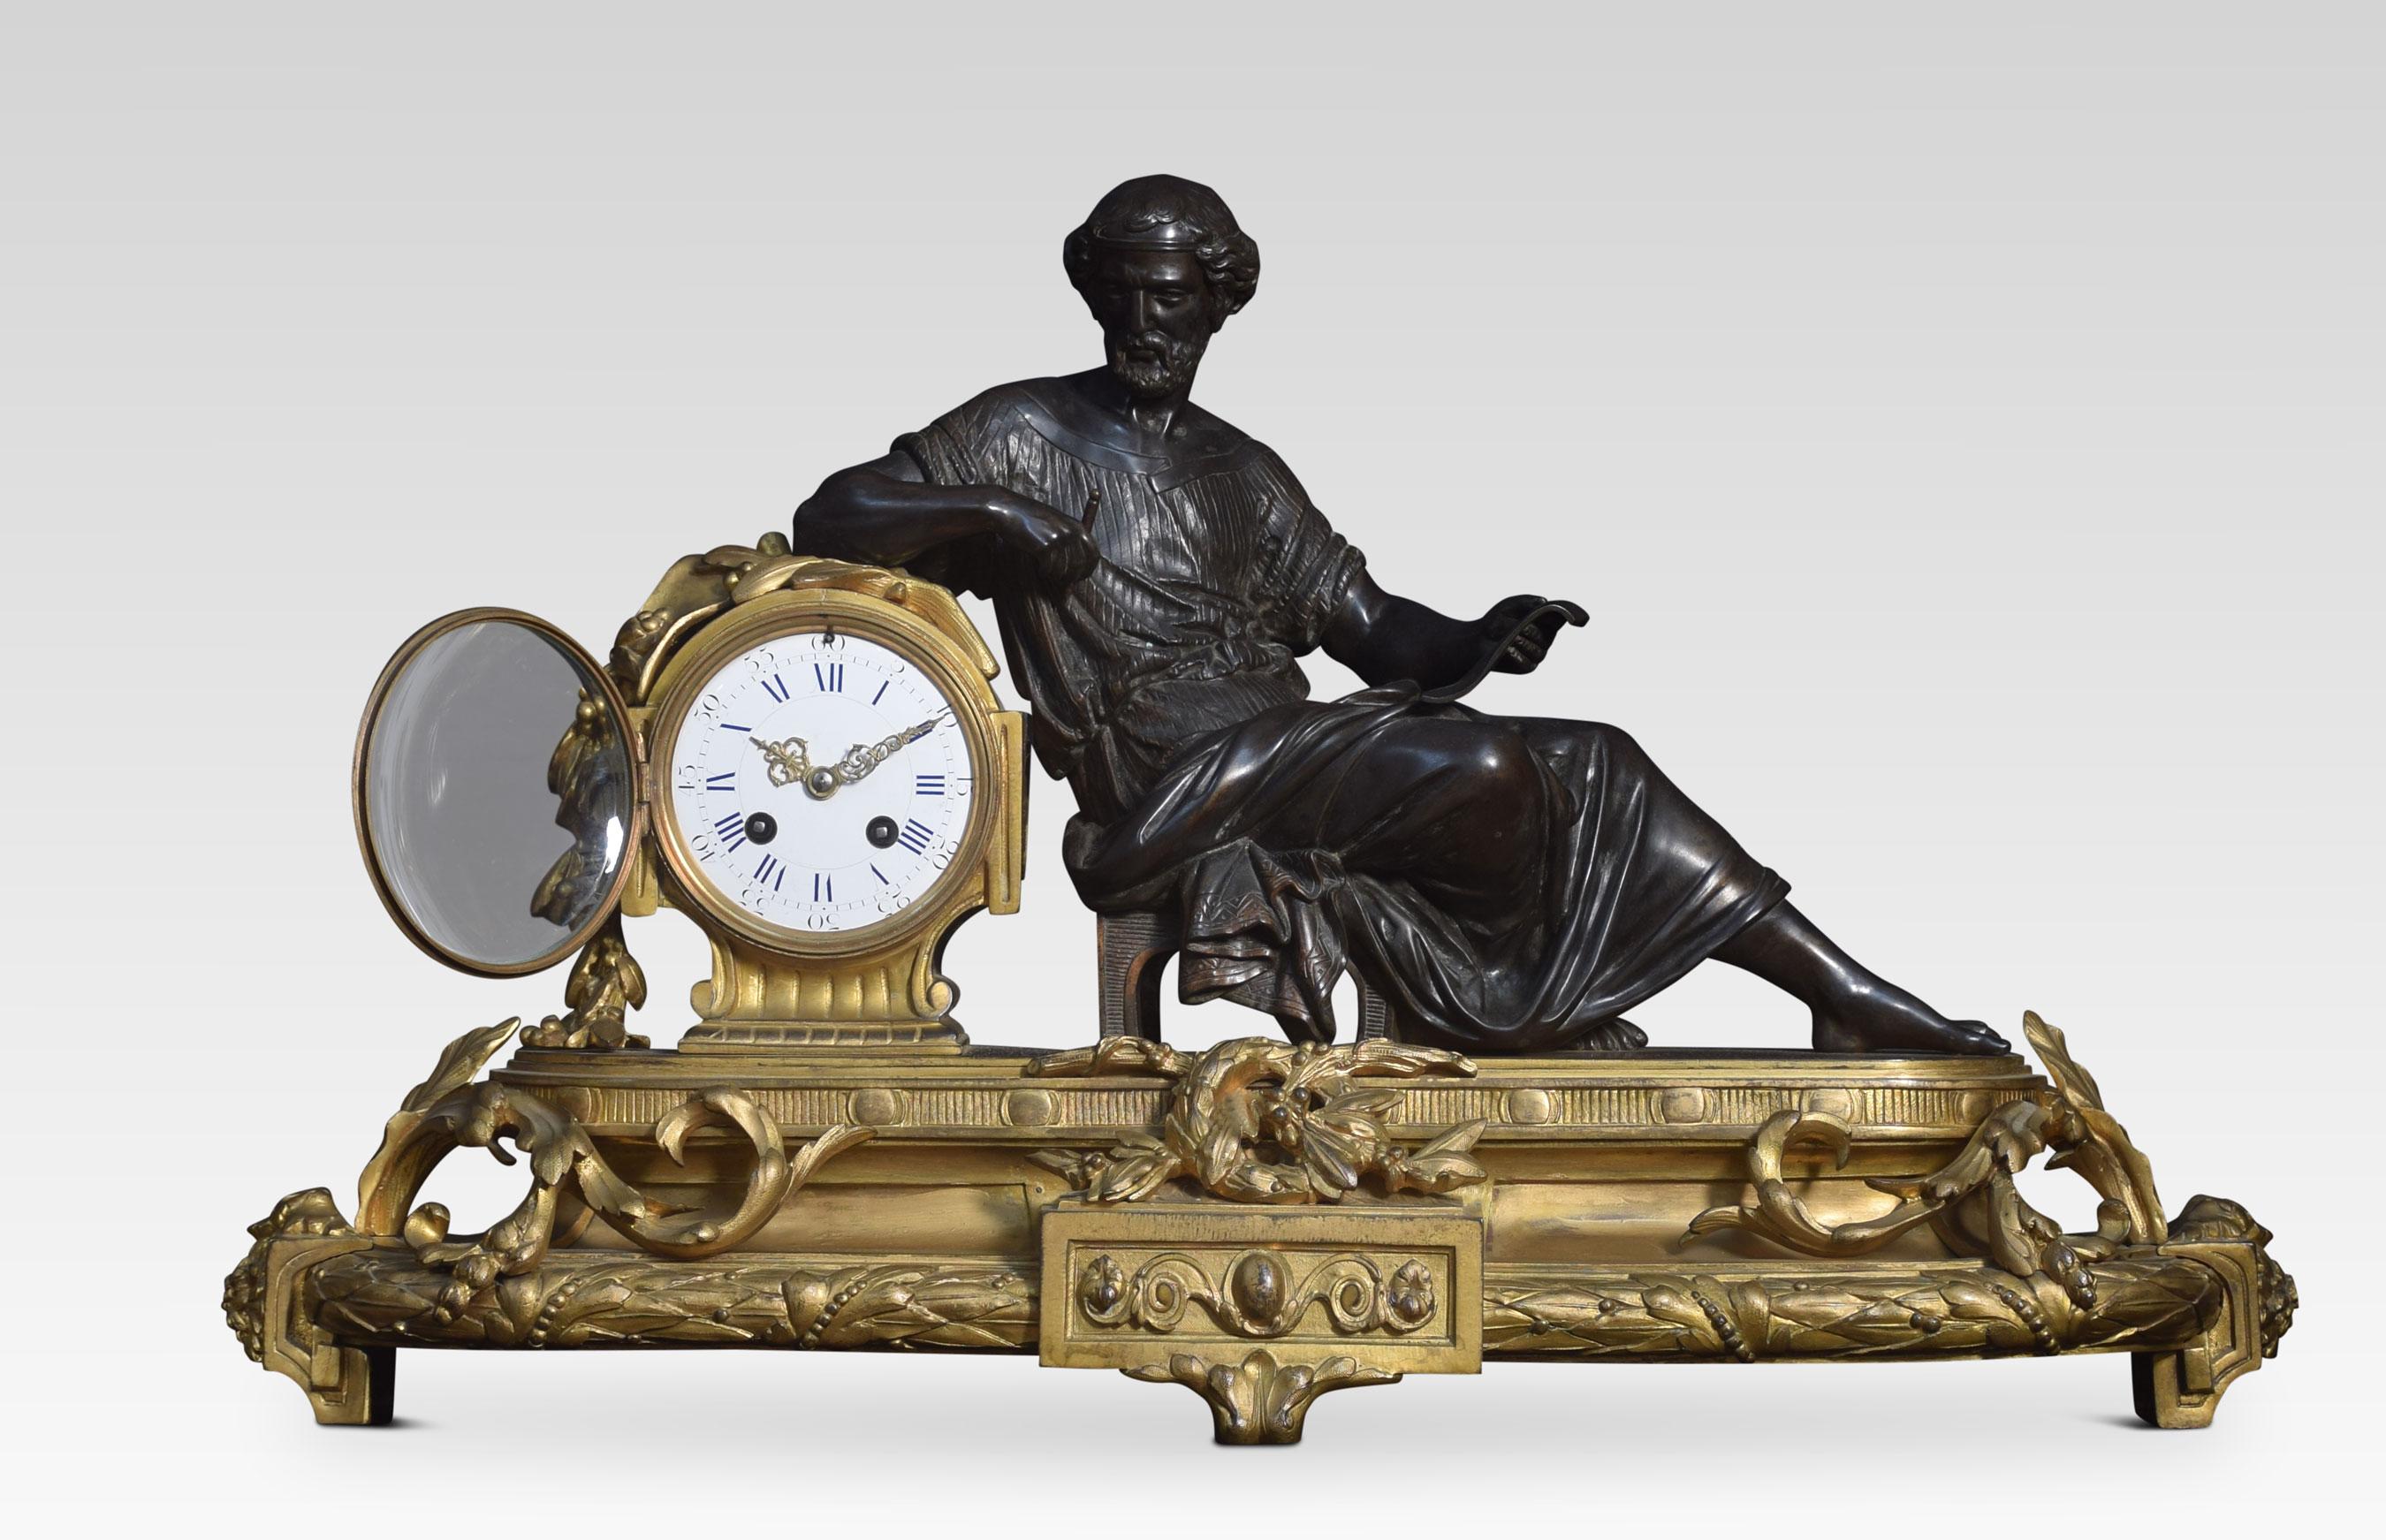 Late 19th-century French gilt metal mantel clock, surmounted with a classical figure, opposing a white enamel Roman numeral drum dial striking on a bell. Raised up on a plinth molded with foliate detail.
Dimensions:
Height 15 inches
Width 25